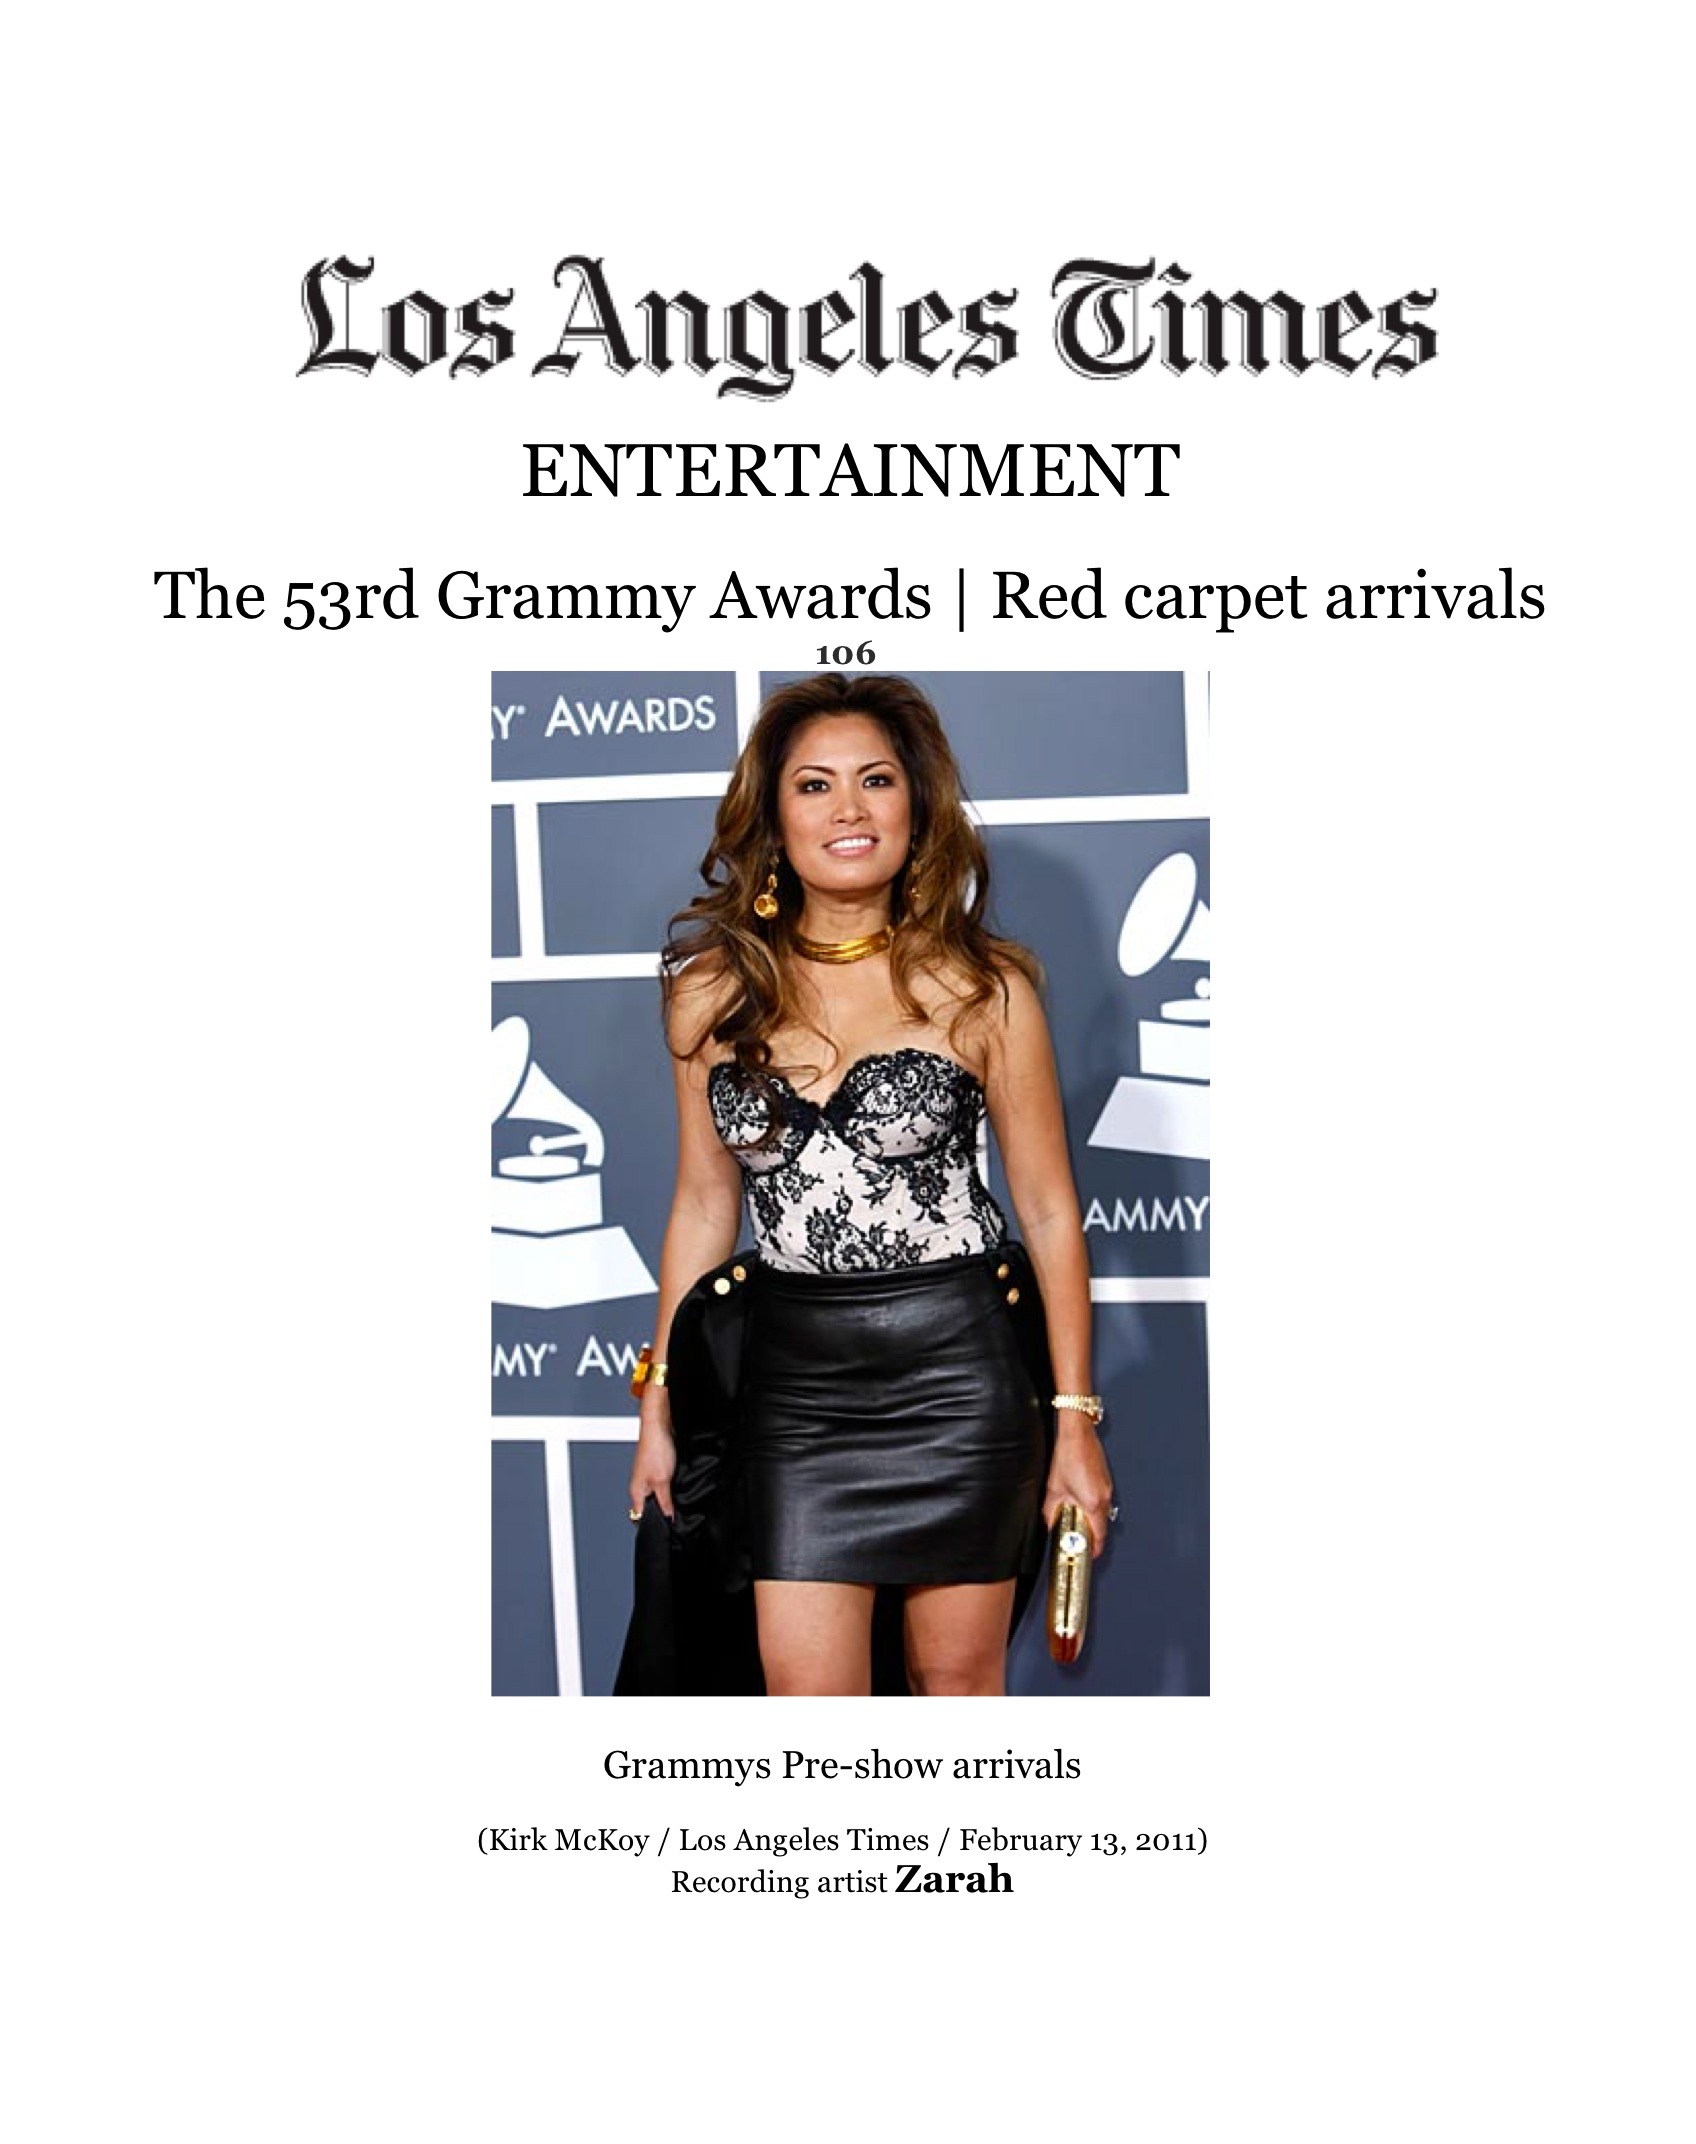 Recording artist ZARAH featured on L.A. TIMES at the 2011 Grammy Awards. Gown by ZARAH Couture. (Kirk McKoy / Los Angeles Times / February 13, 2011)